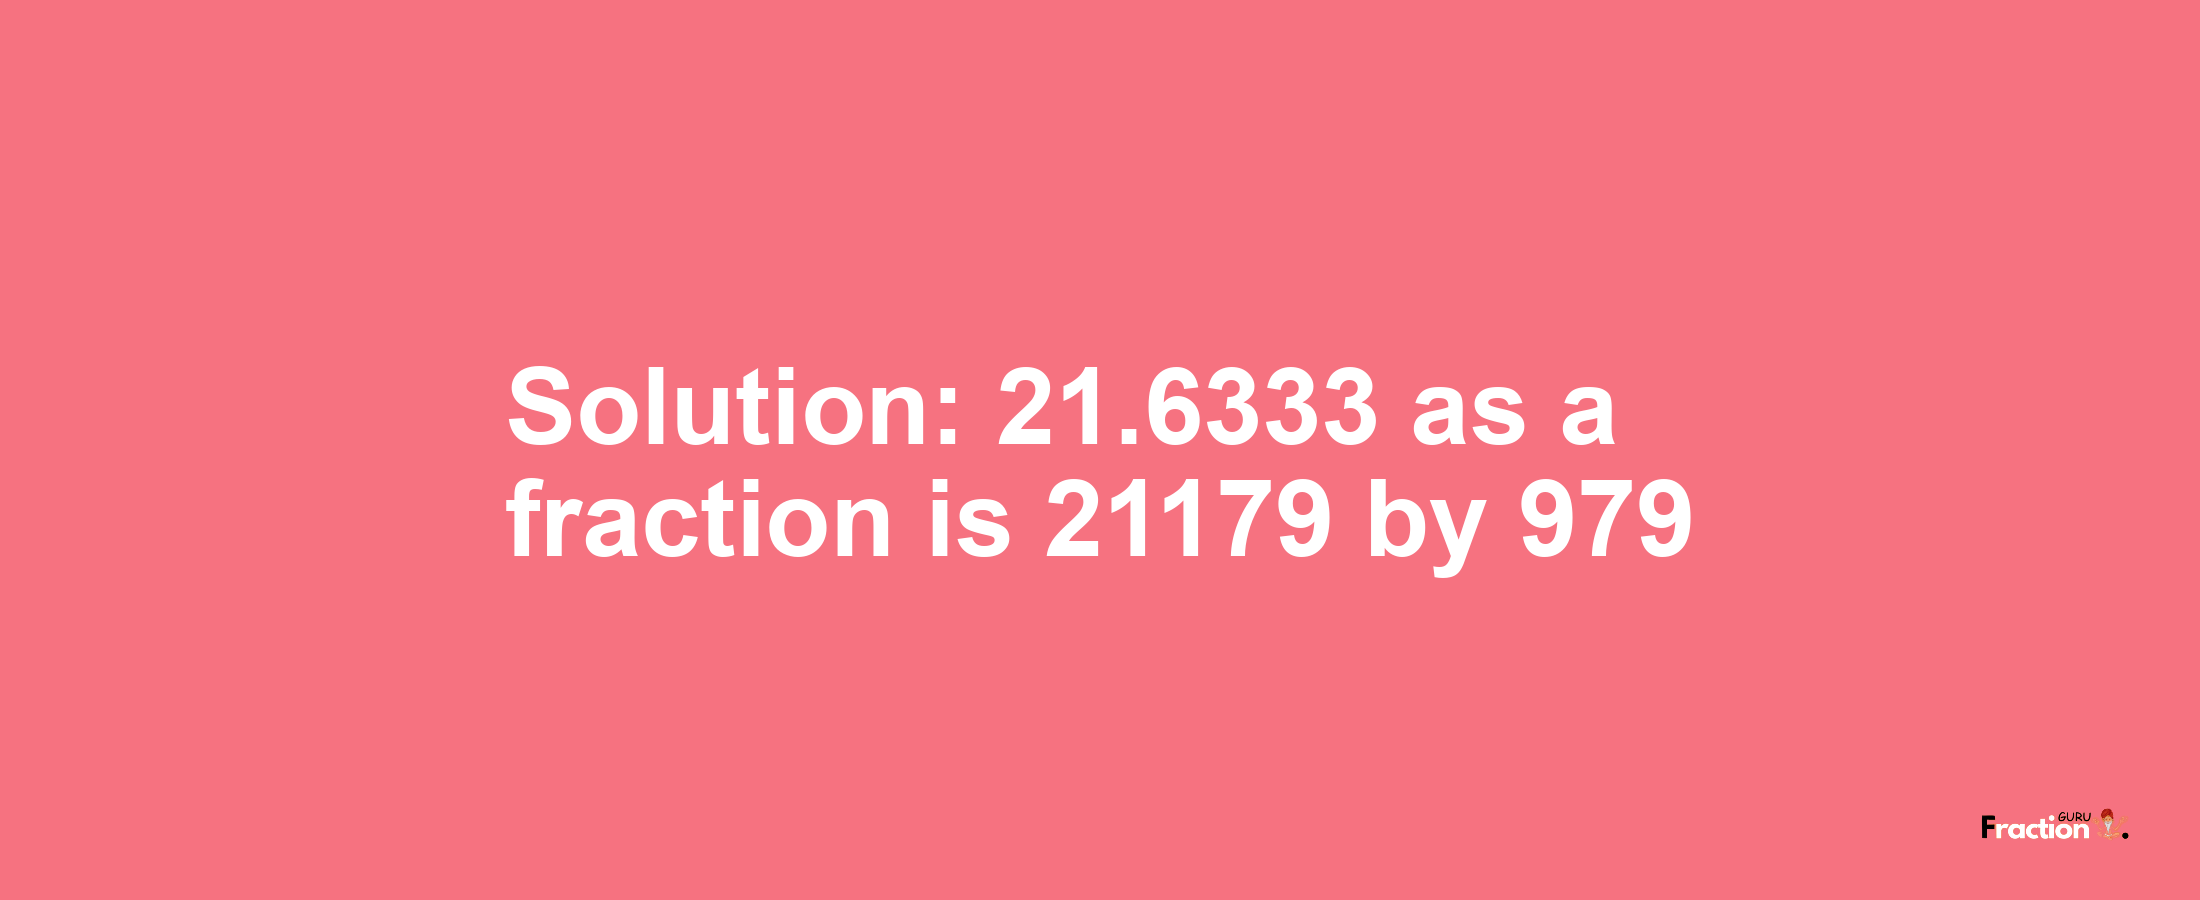 Solution:21.6333 as a fraction is 21179/979